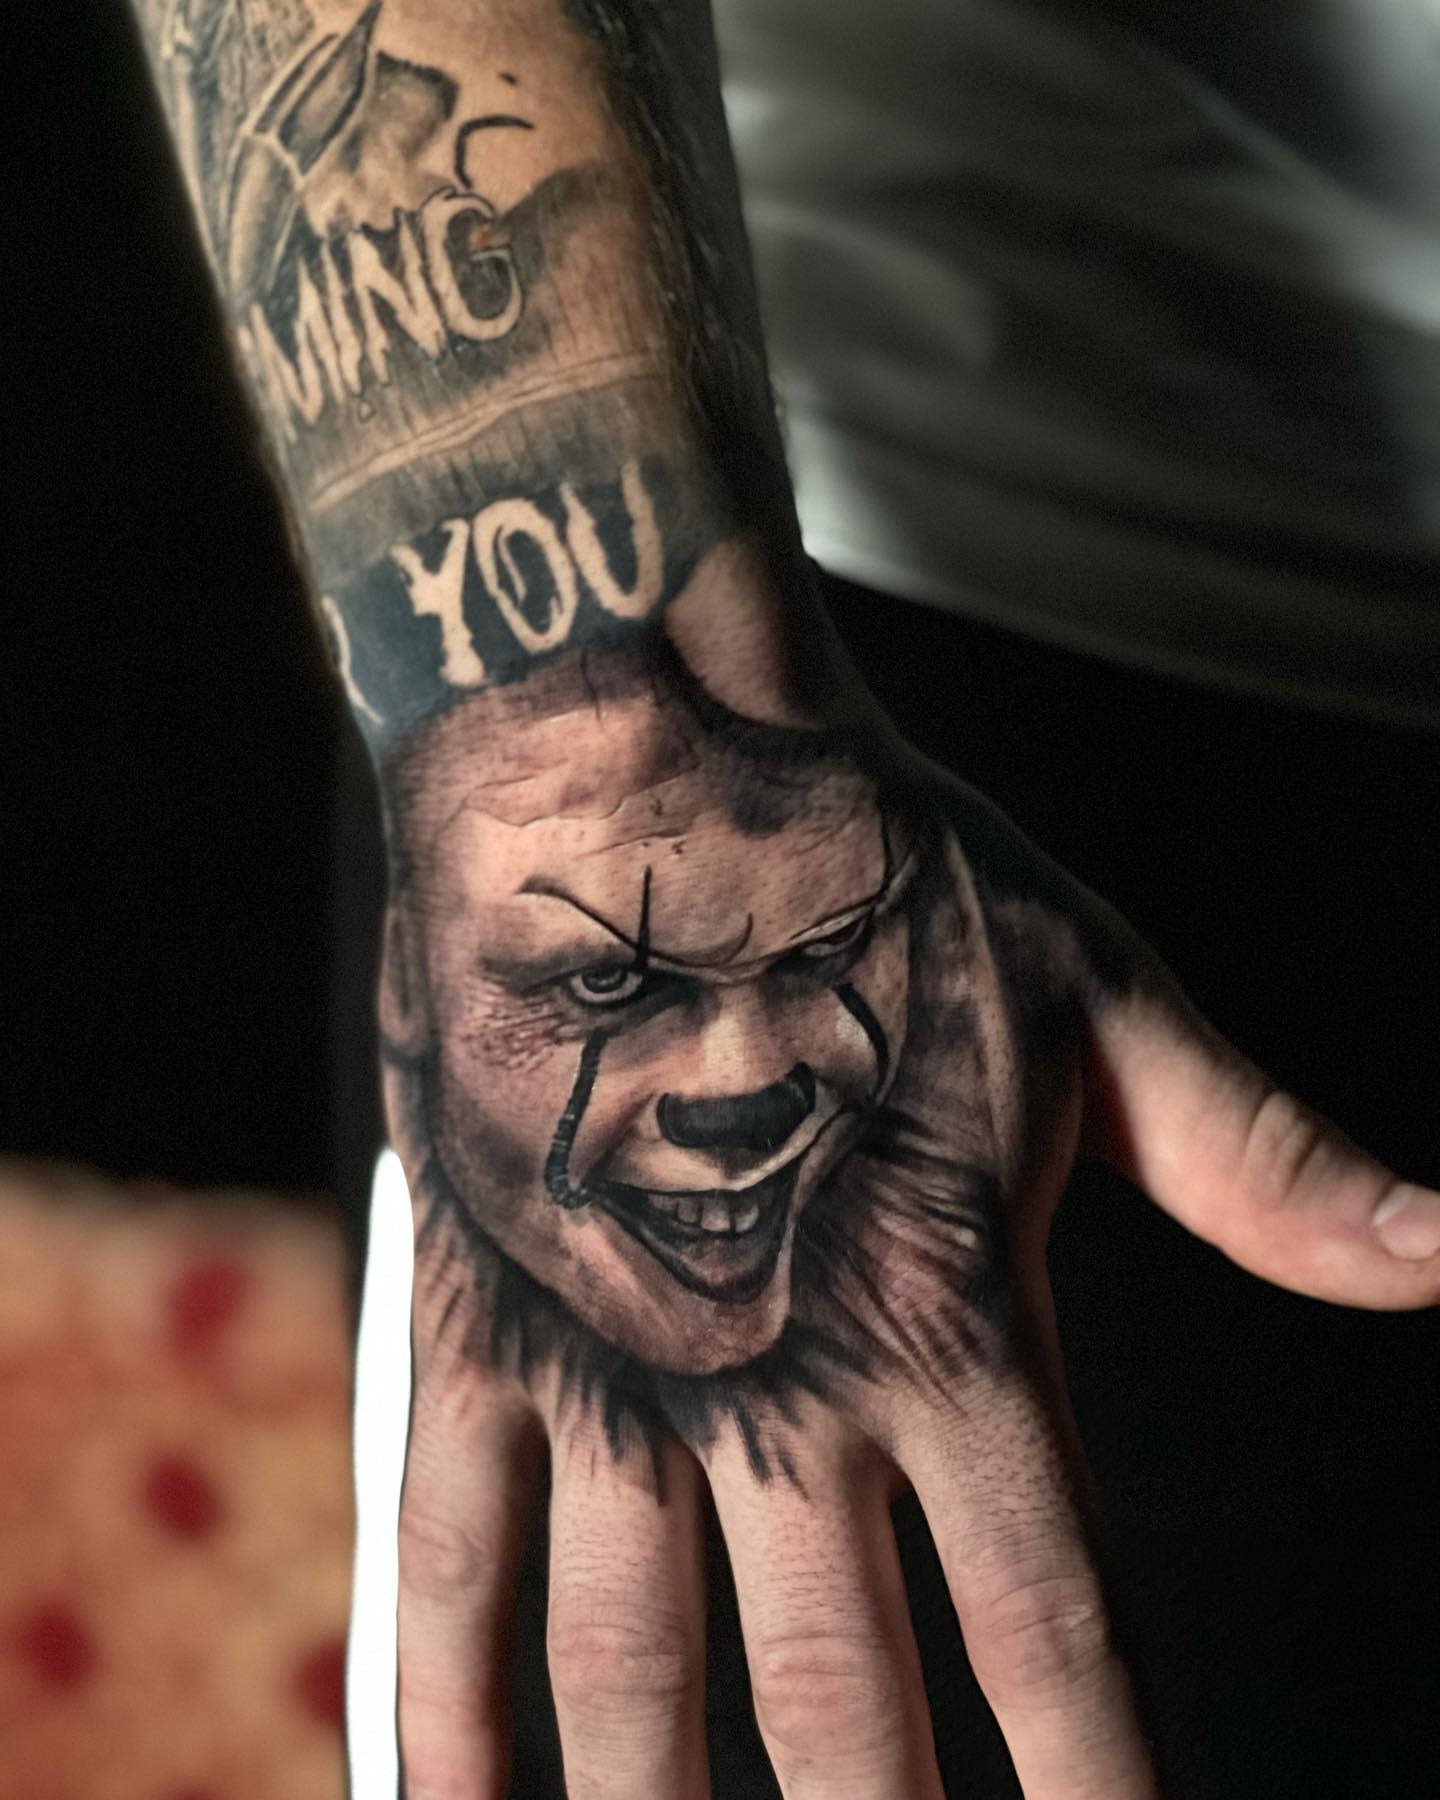 The Top 45 Pennywise Tattoo Ideas - [2021 Inspiration Guide]